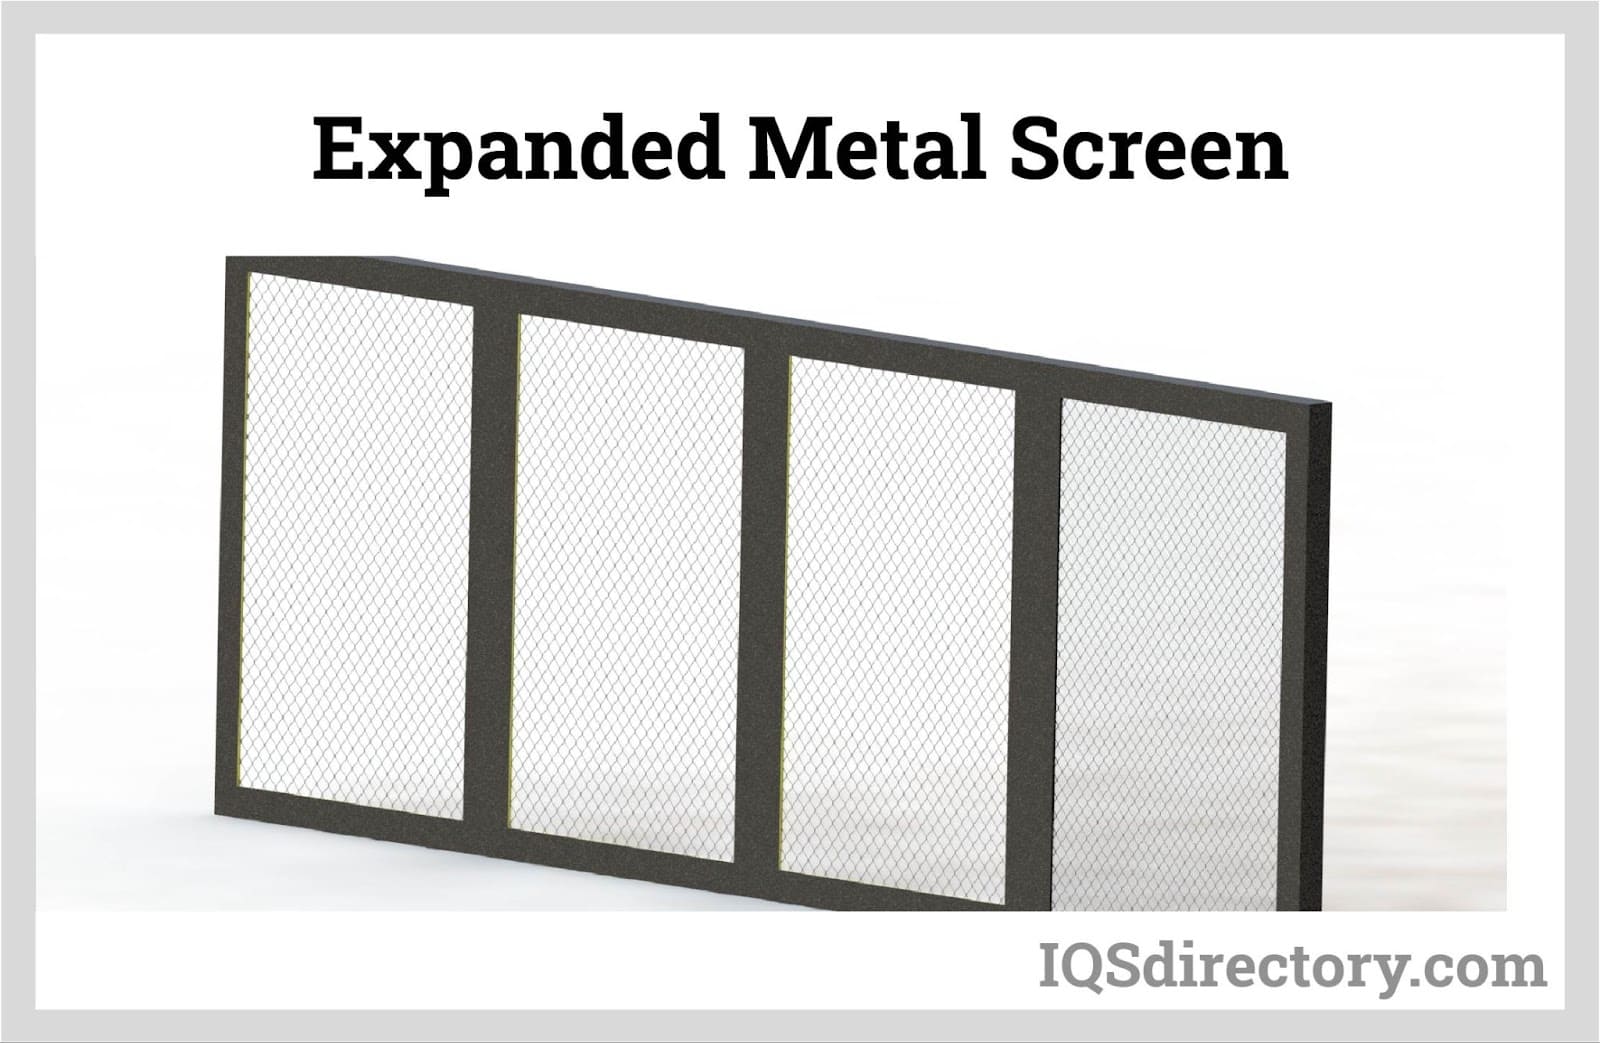 Expanded Metal Screen